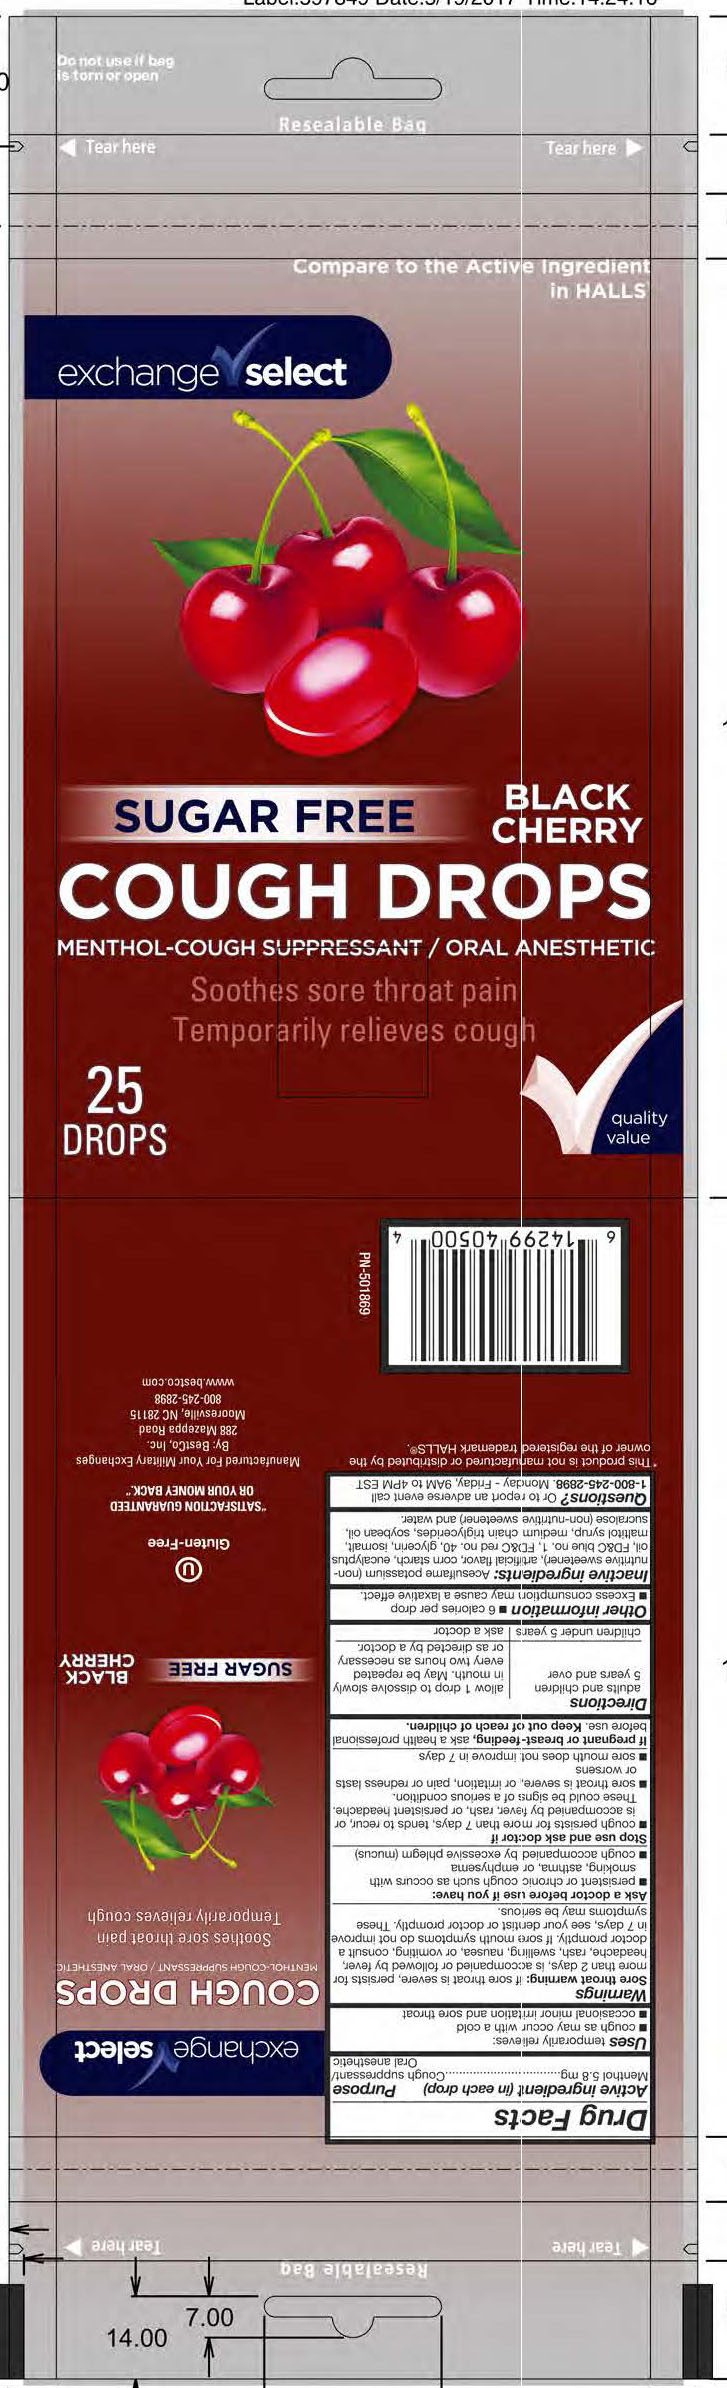 Exchange Select SF Cherry 25ct Cough Drops